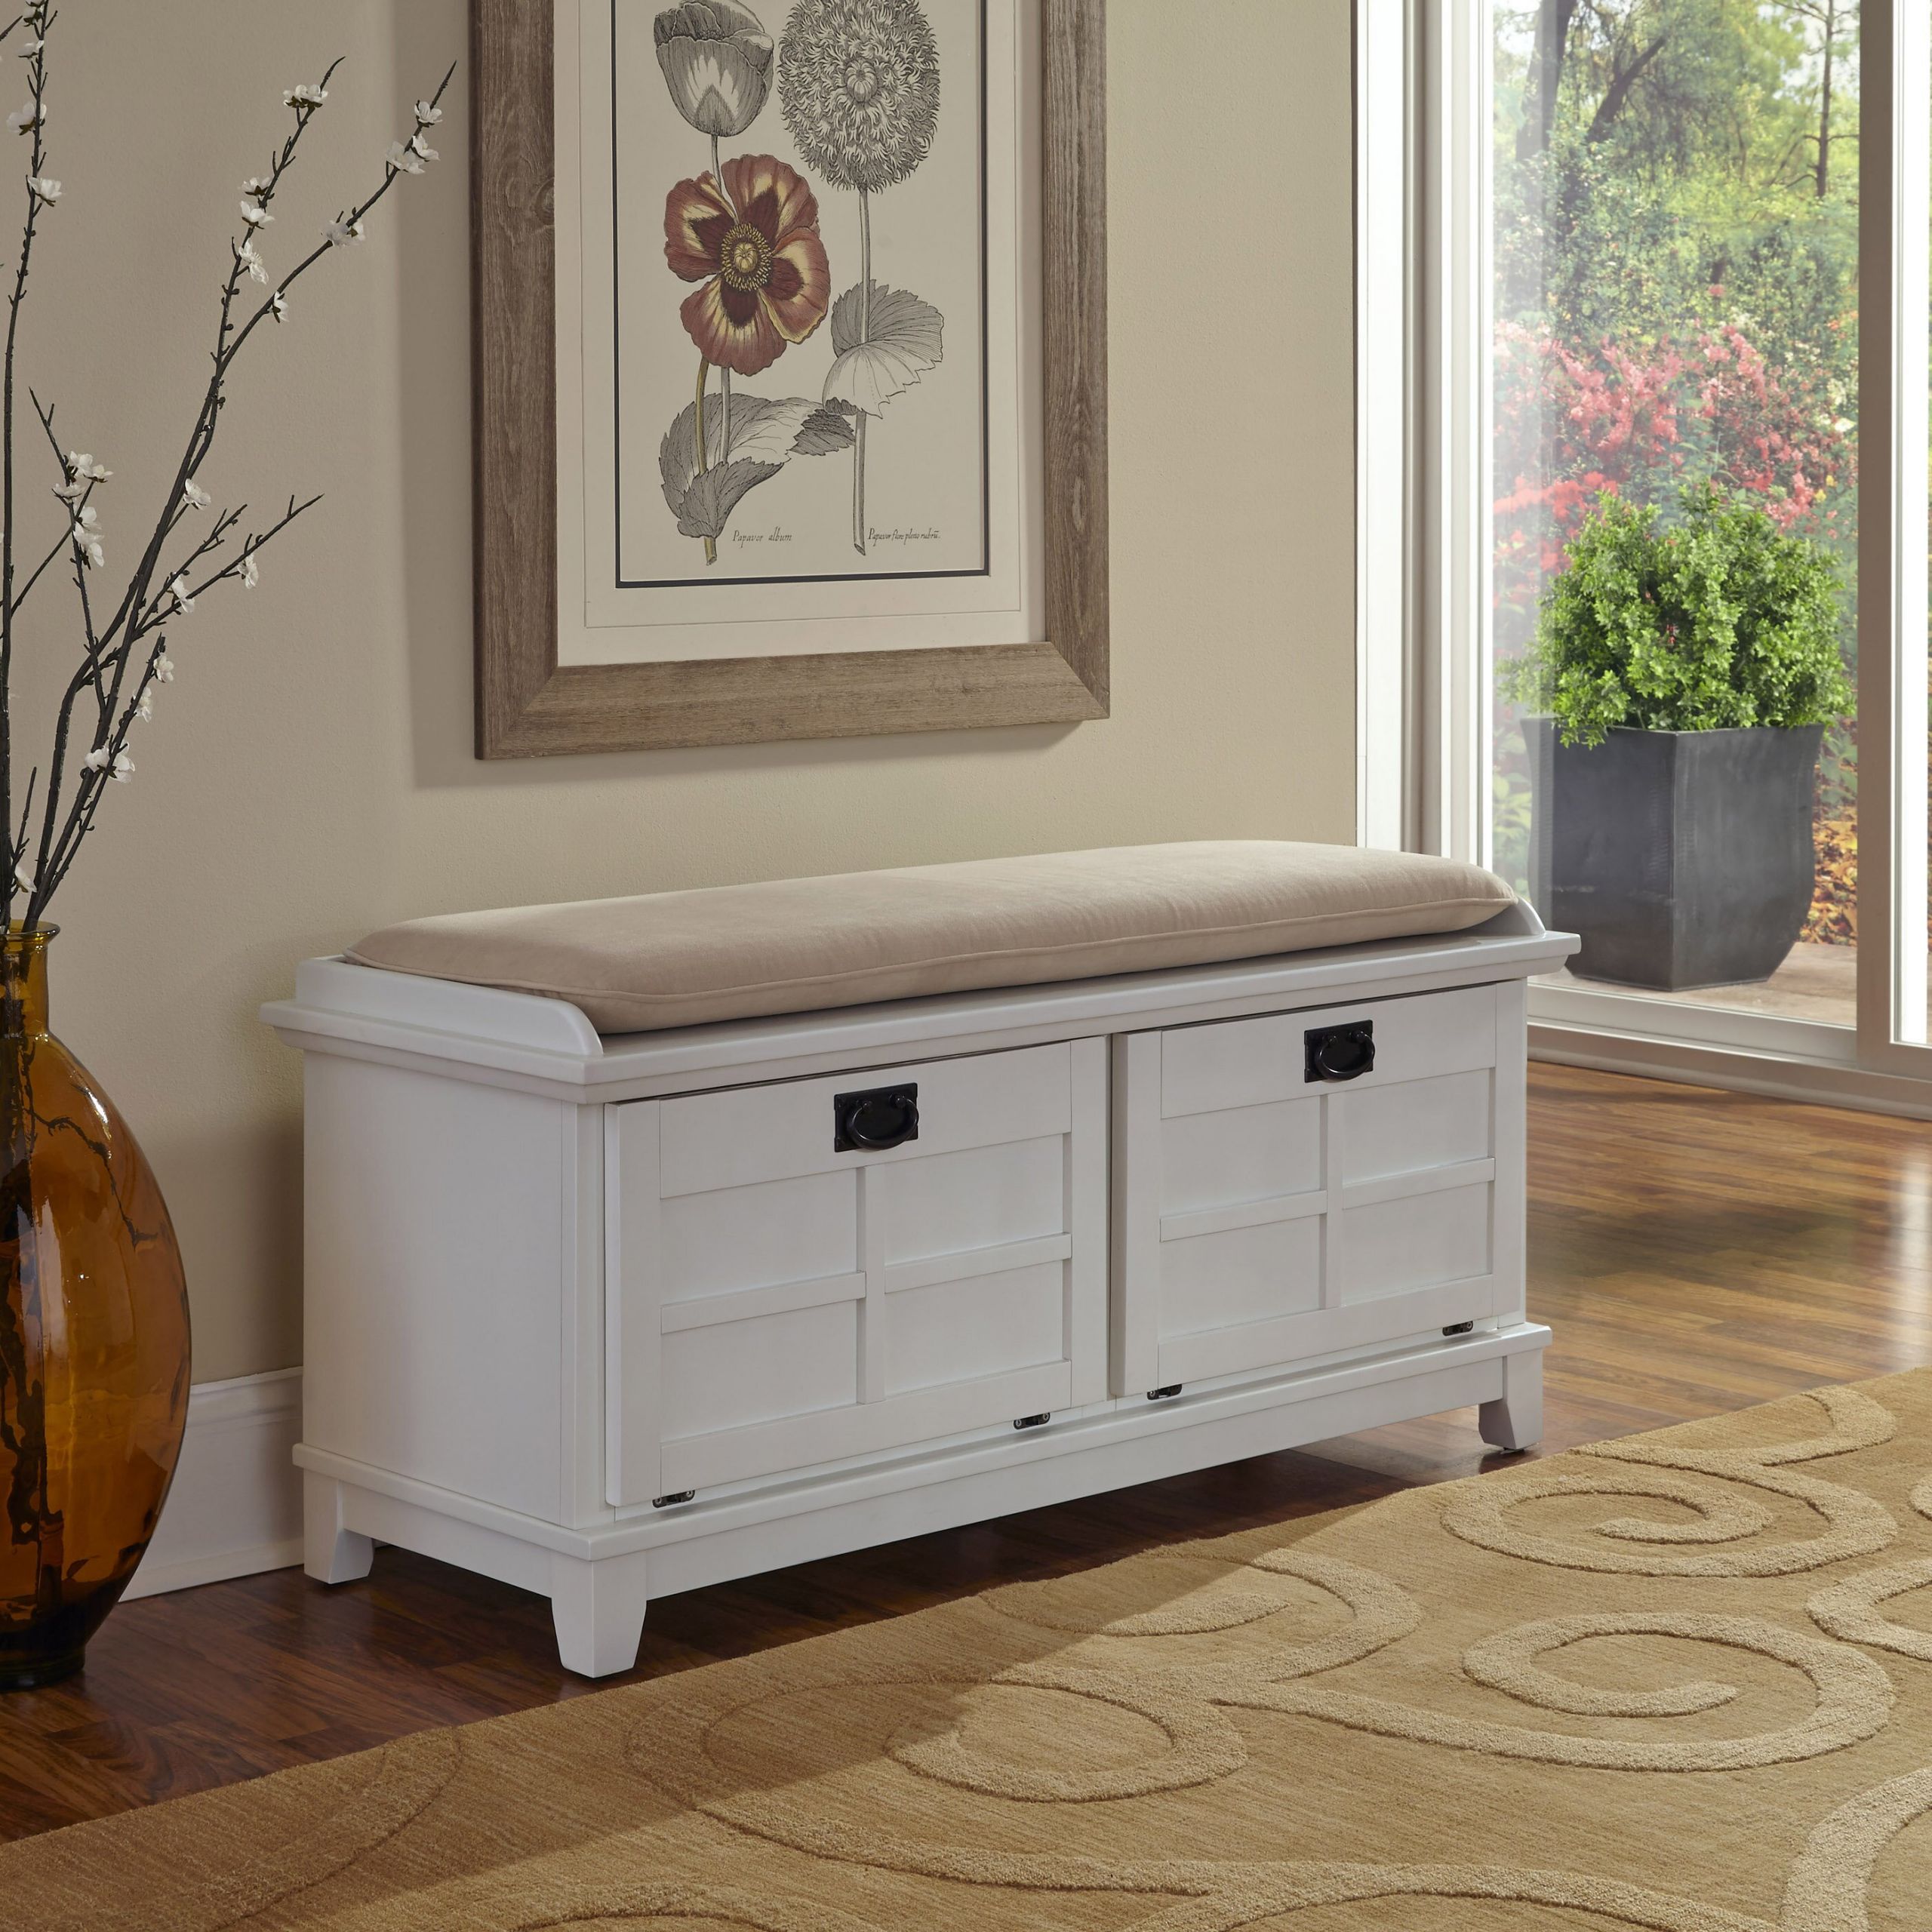 Entry Storage Bench
 Alcott Hill Lakeview Wood Storage Entryway Bench & Reviews